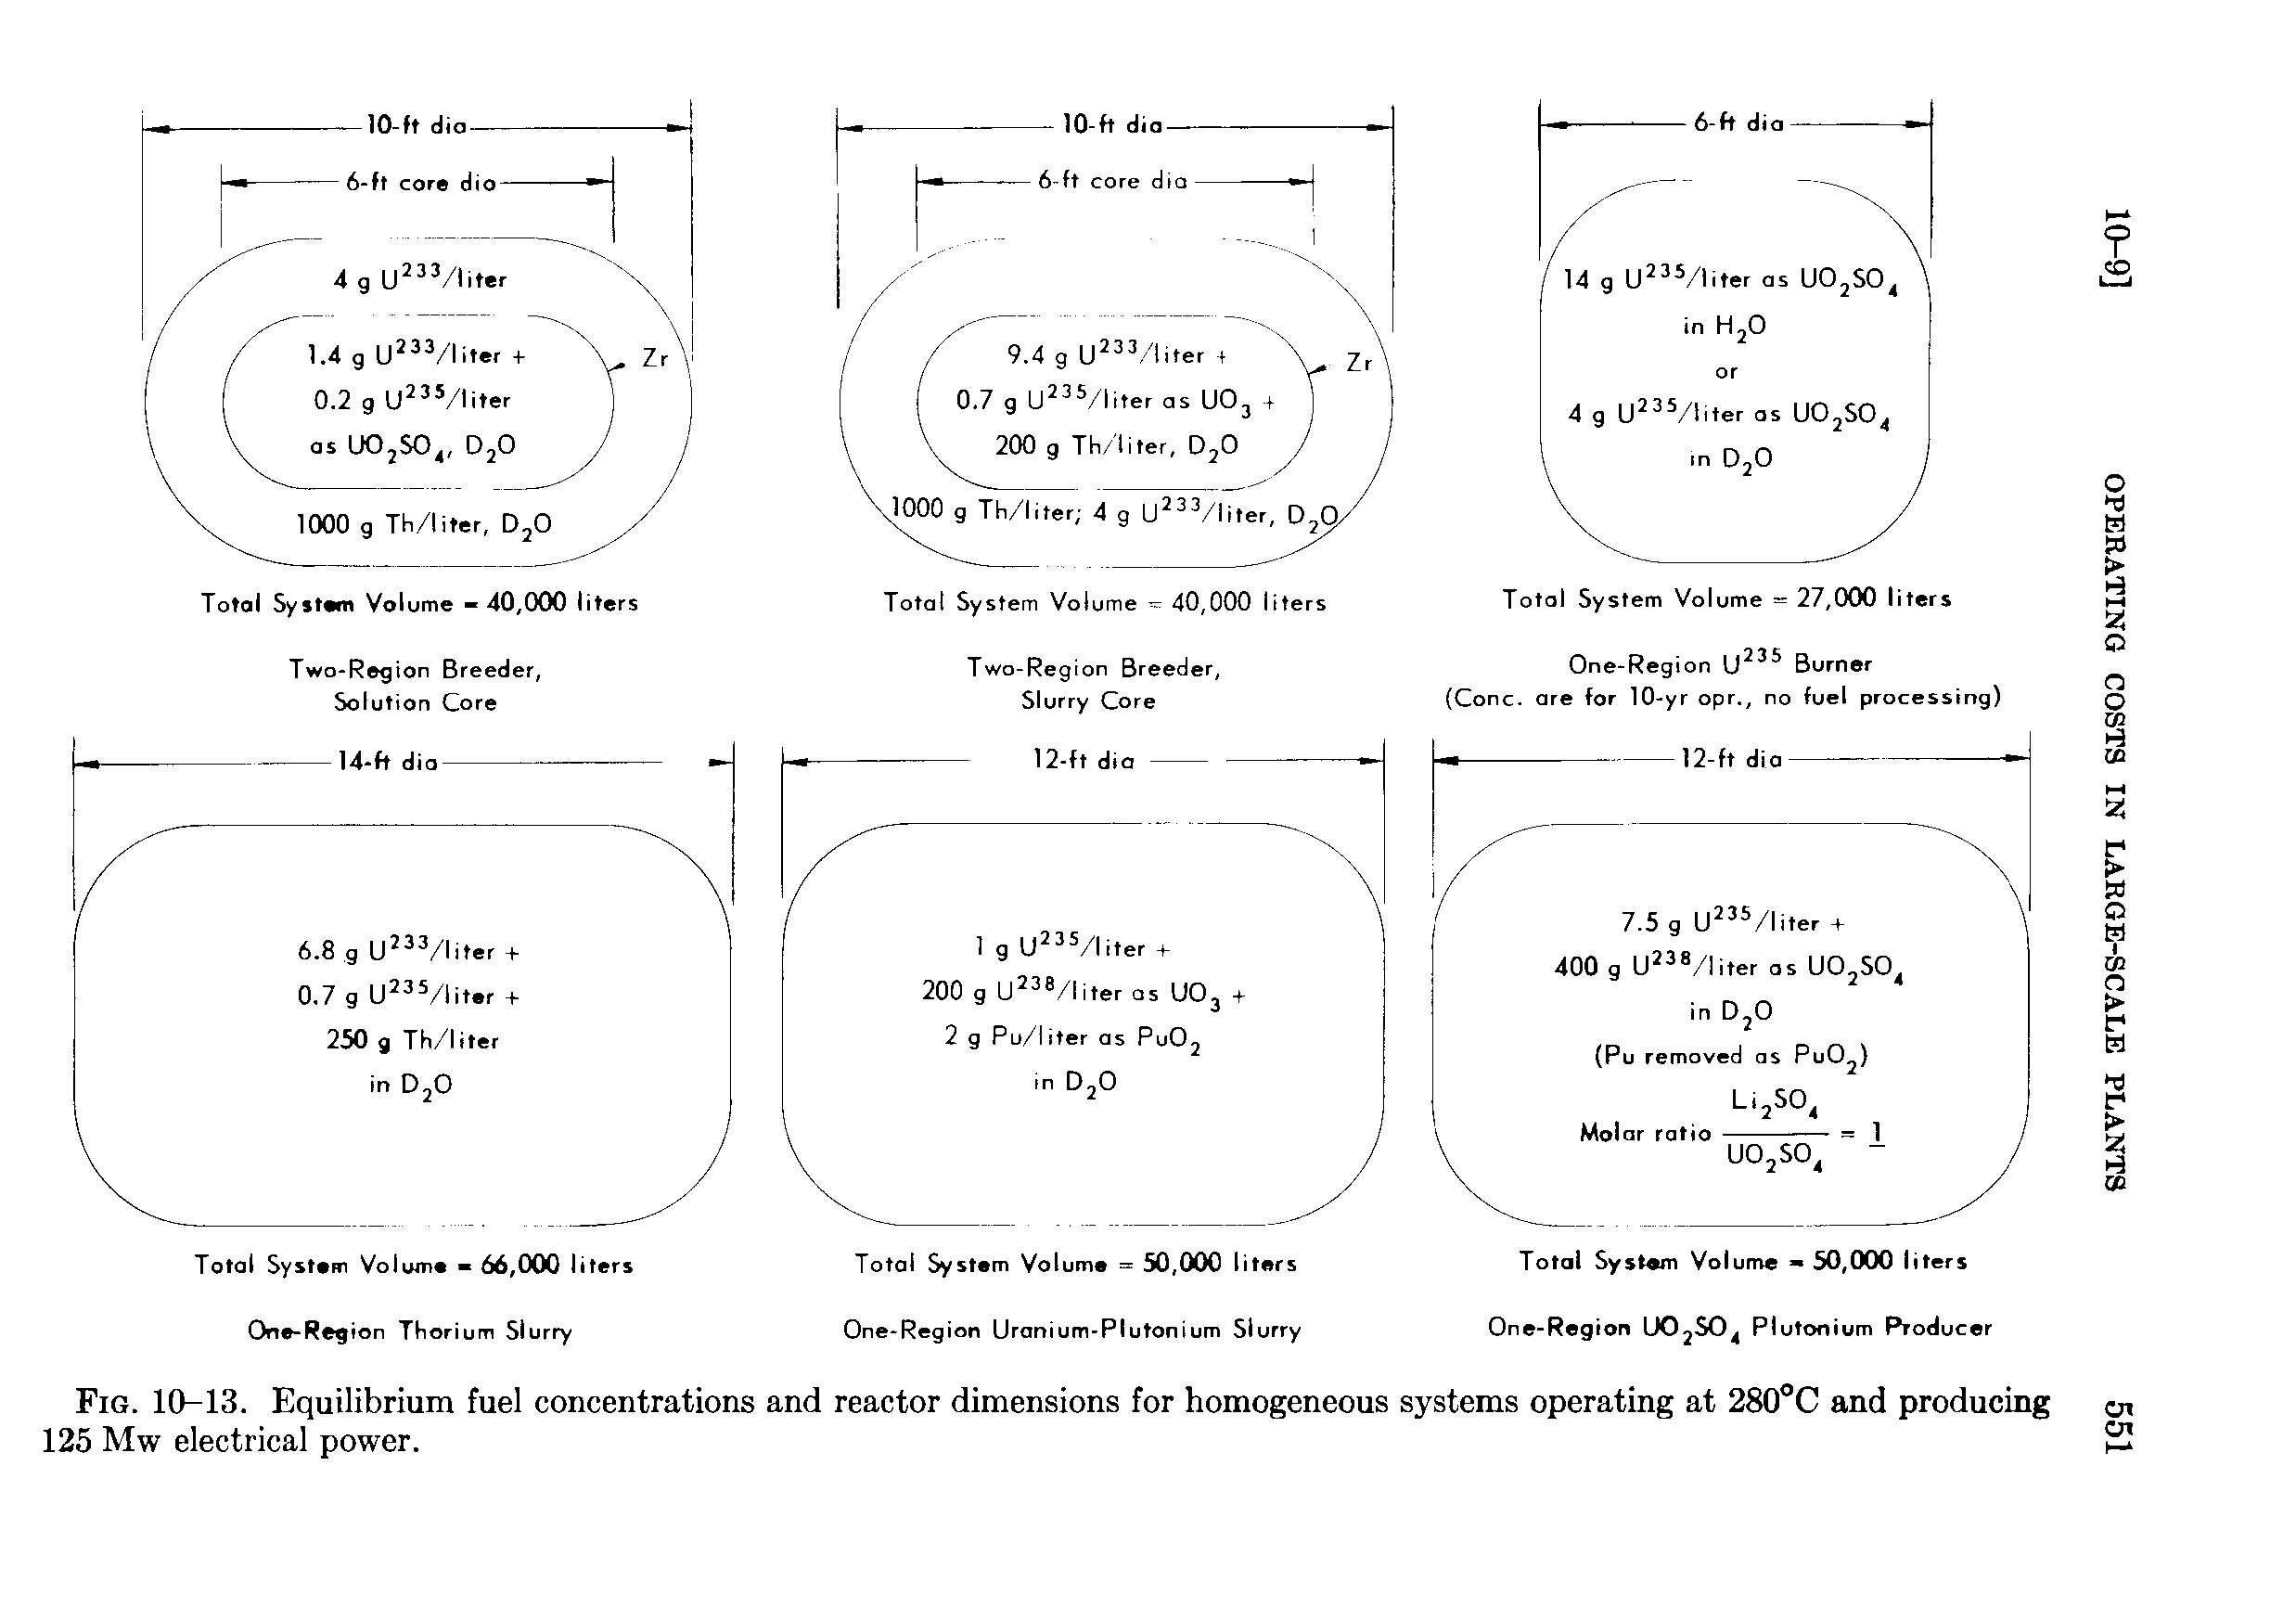 Fig. 10-13. Equilibrium fuel concentrations and reactor dimensions for homogeneous systems operating at 280°C and producing 125 Mw electrical power.